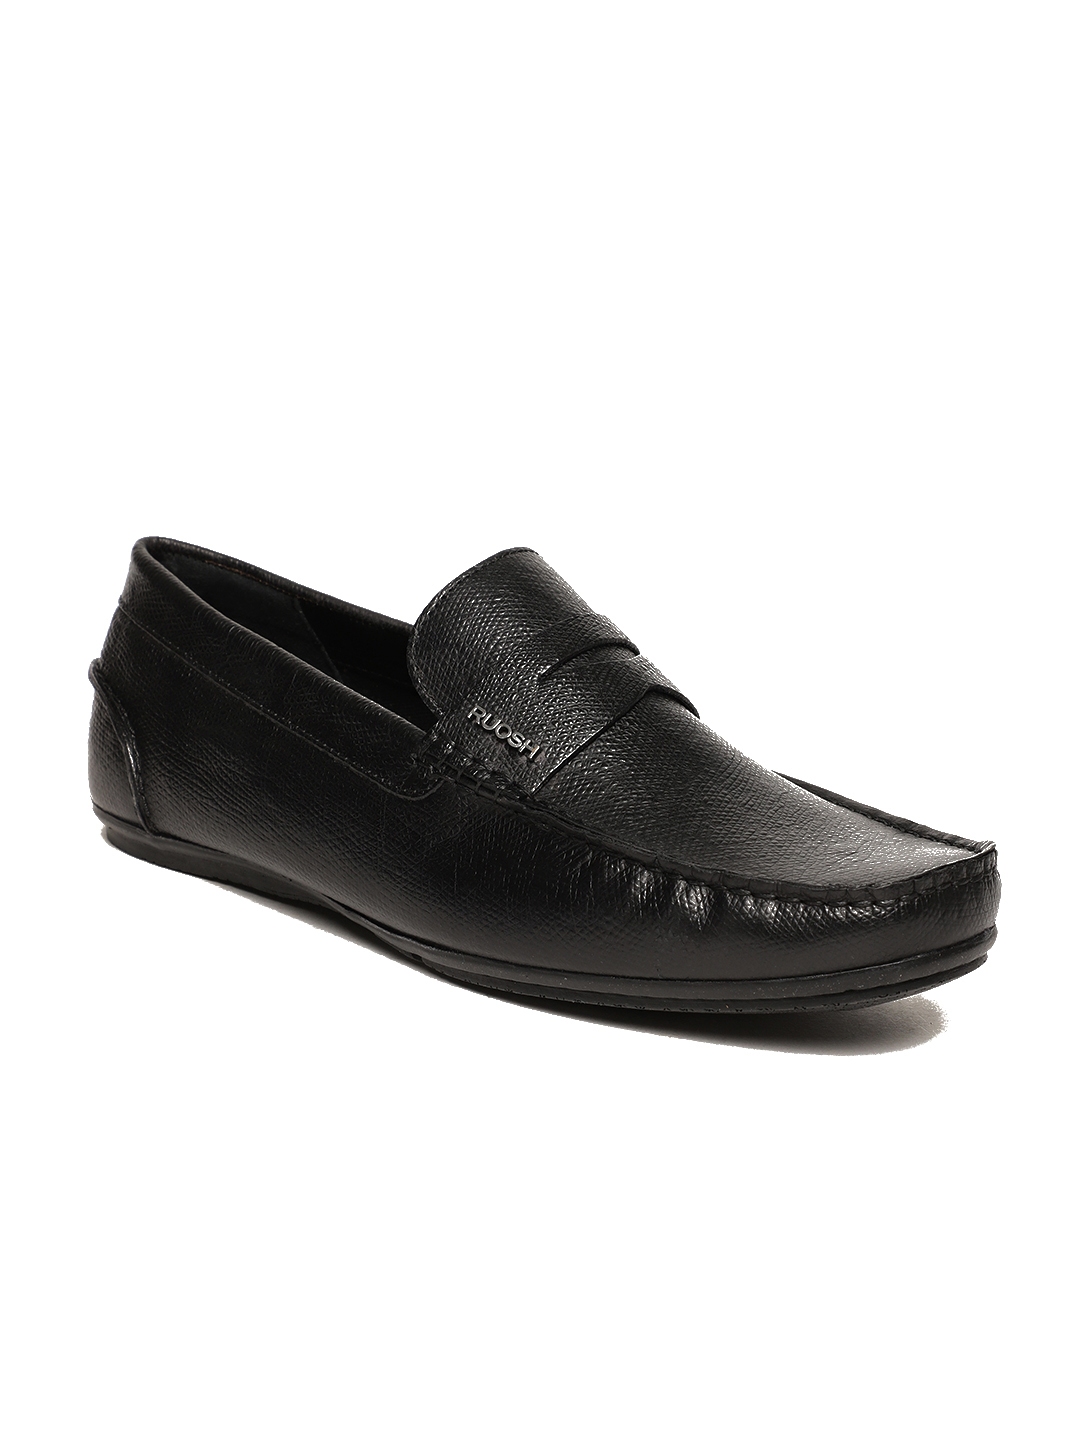 Buy Ruosh Men Black Leather Loafers - Casual Shoes for Men 6546289 | Myntra